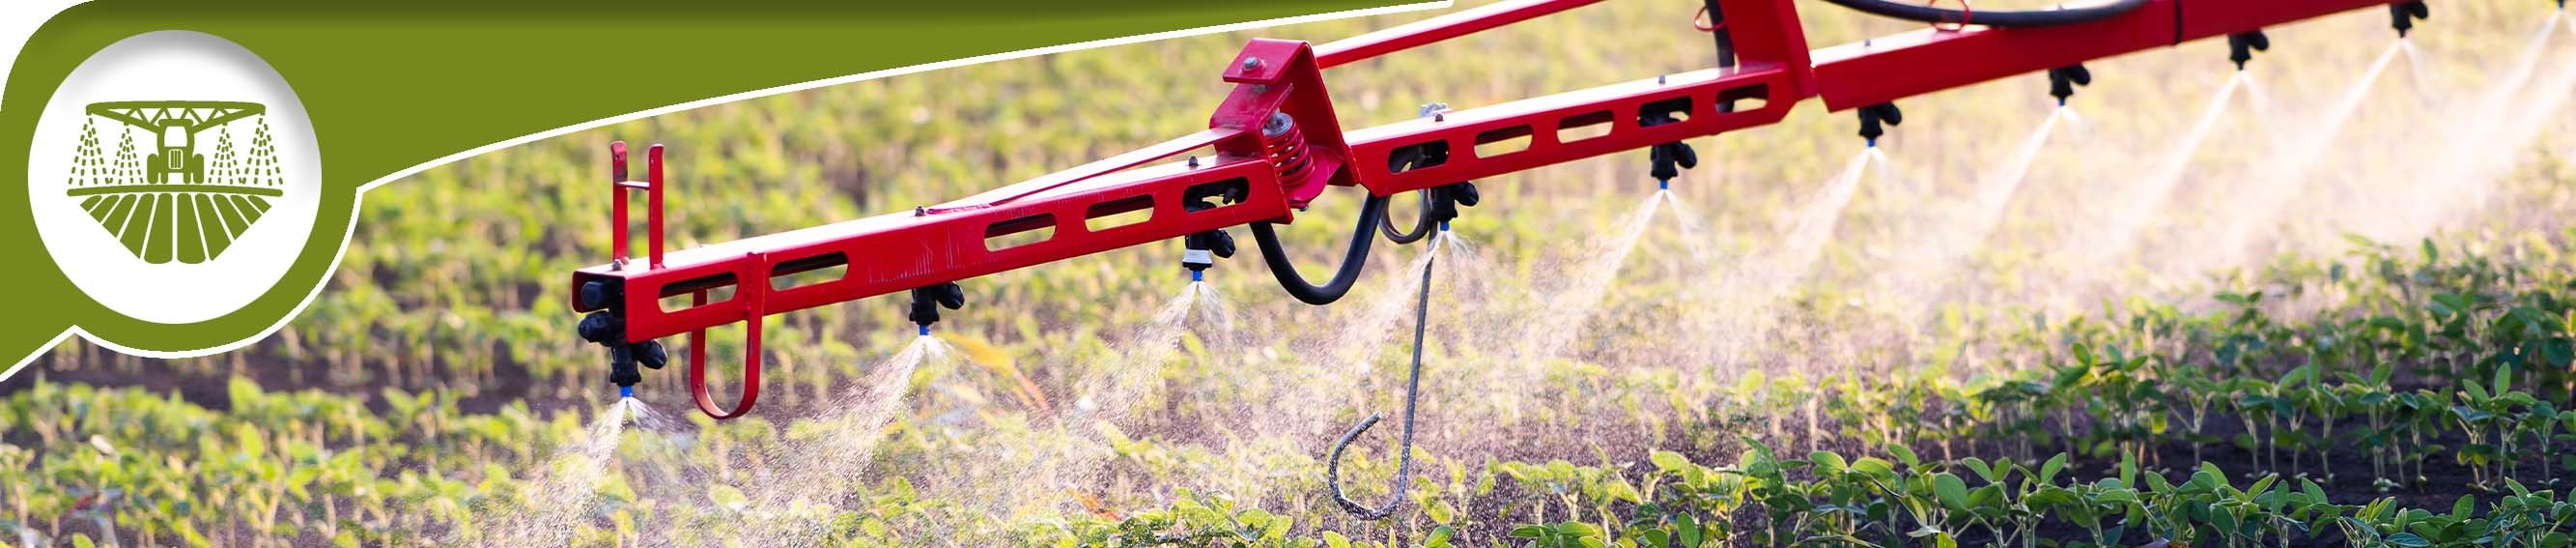 Sprayer Distributing Liquid On Top of Crops in a Field